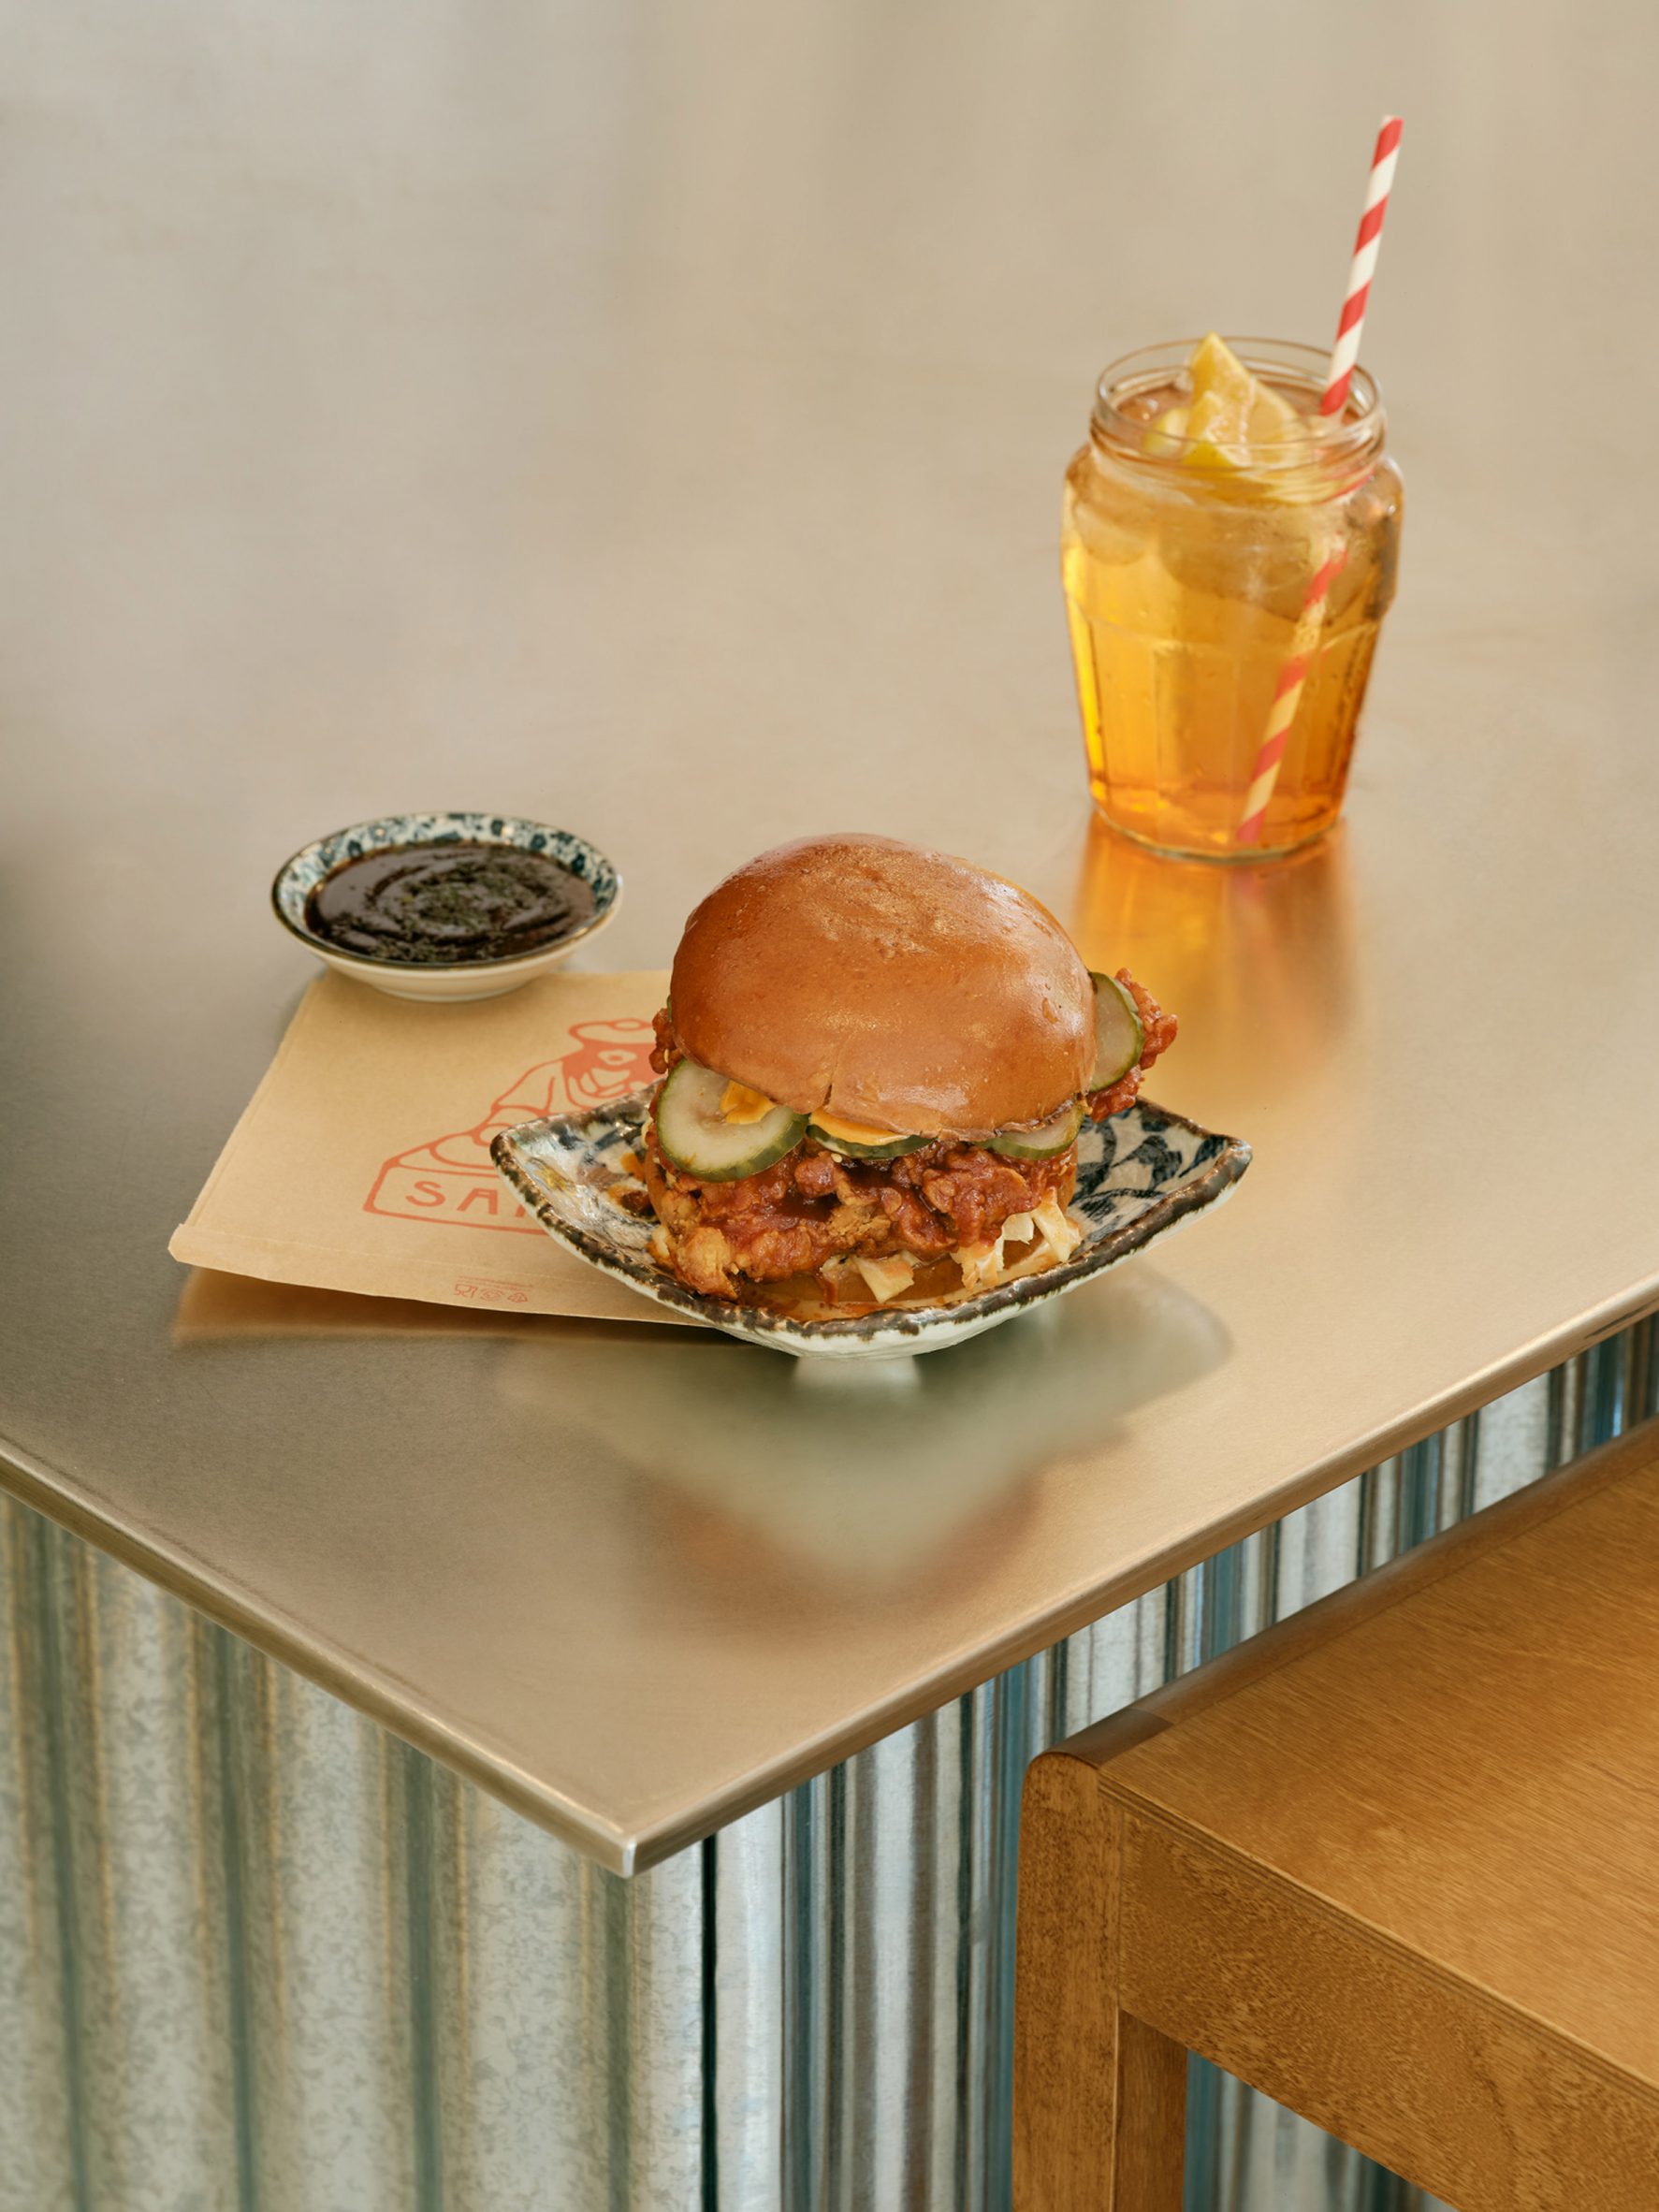 Burger and drink on stainless steel counter